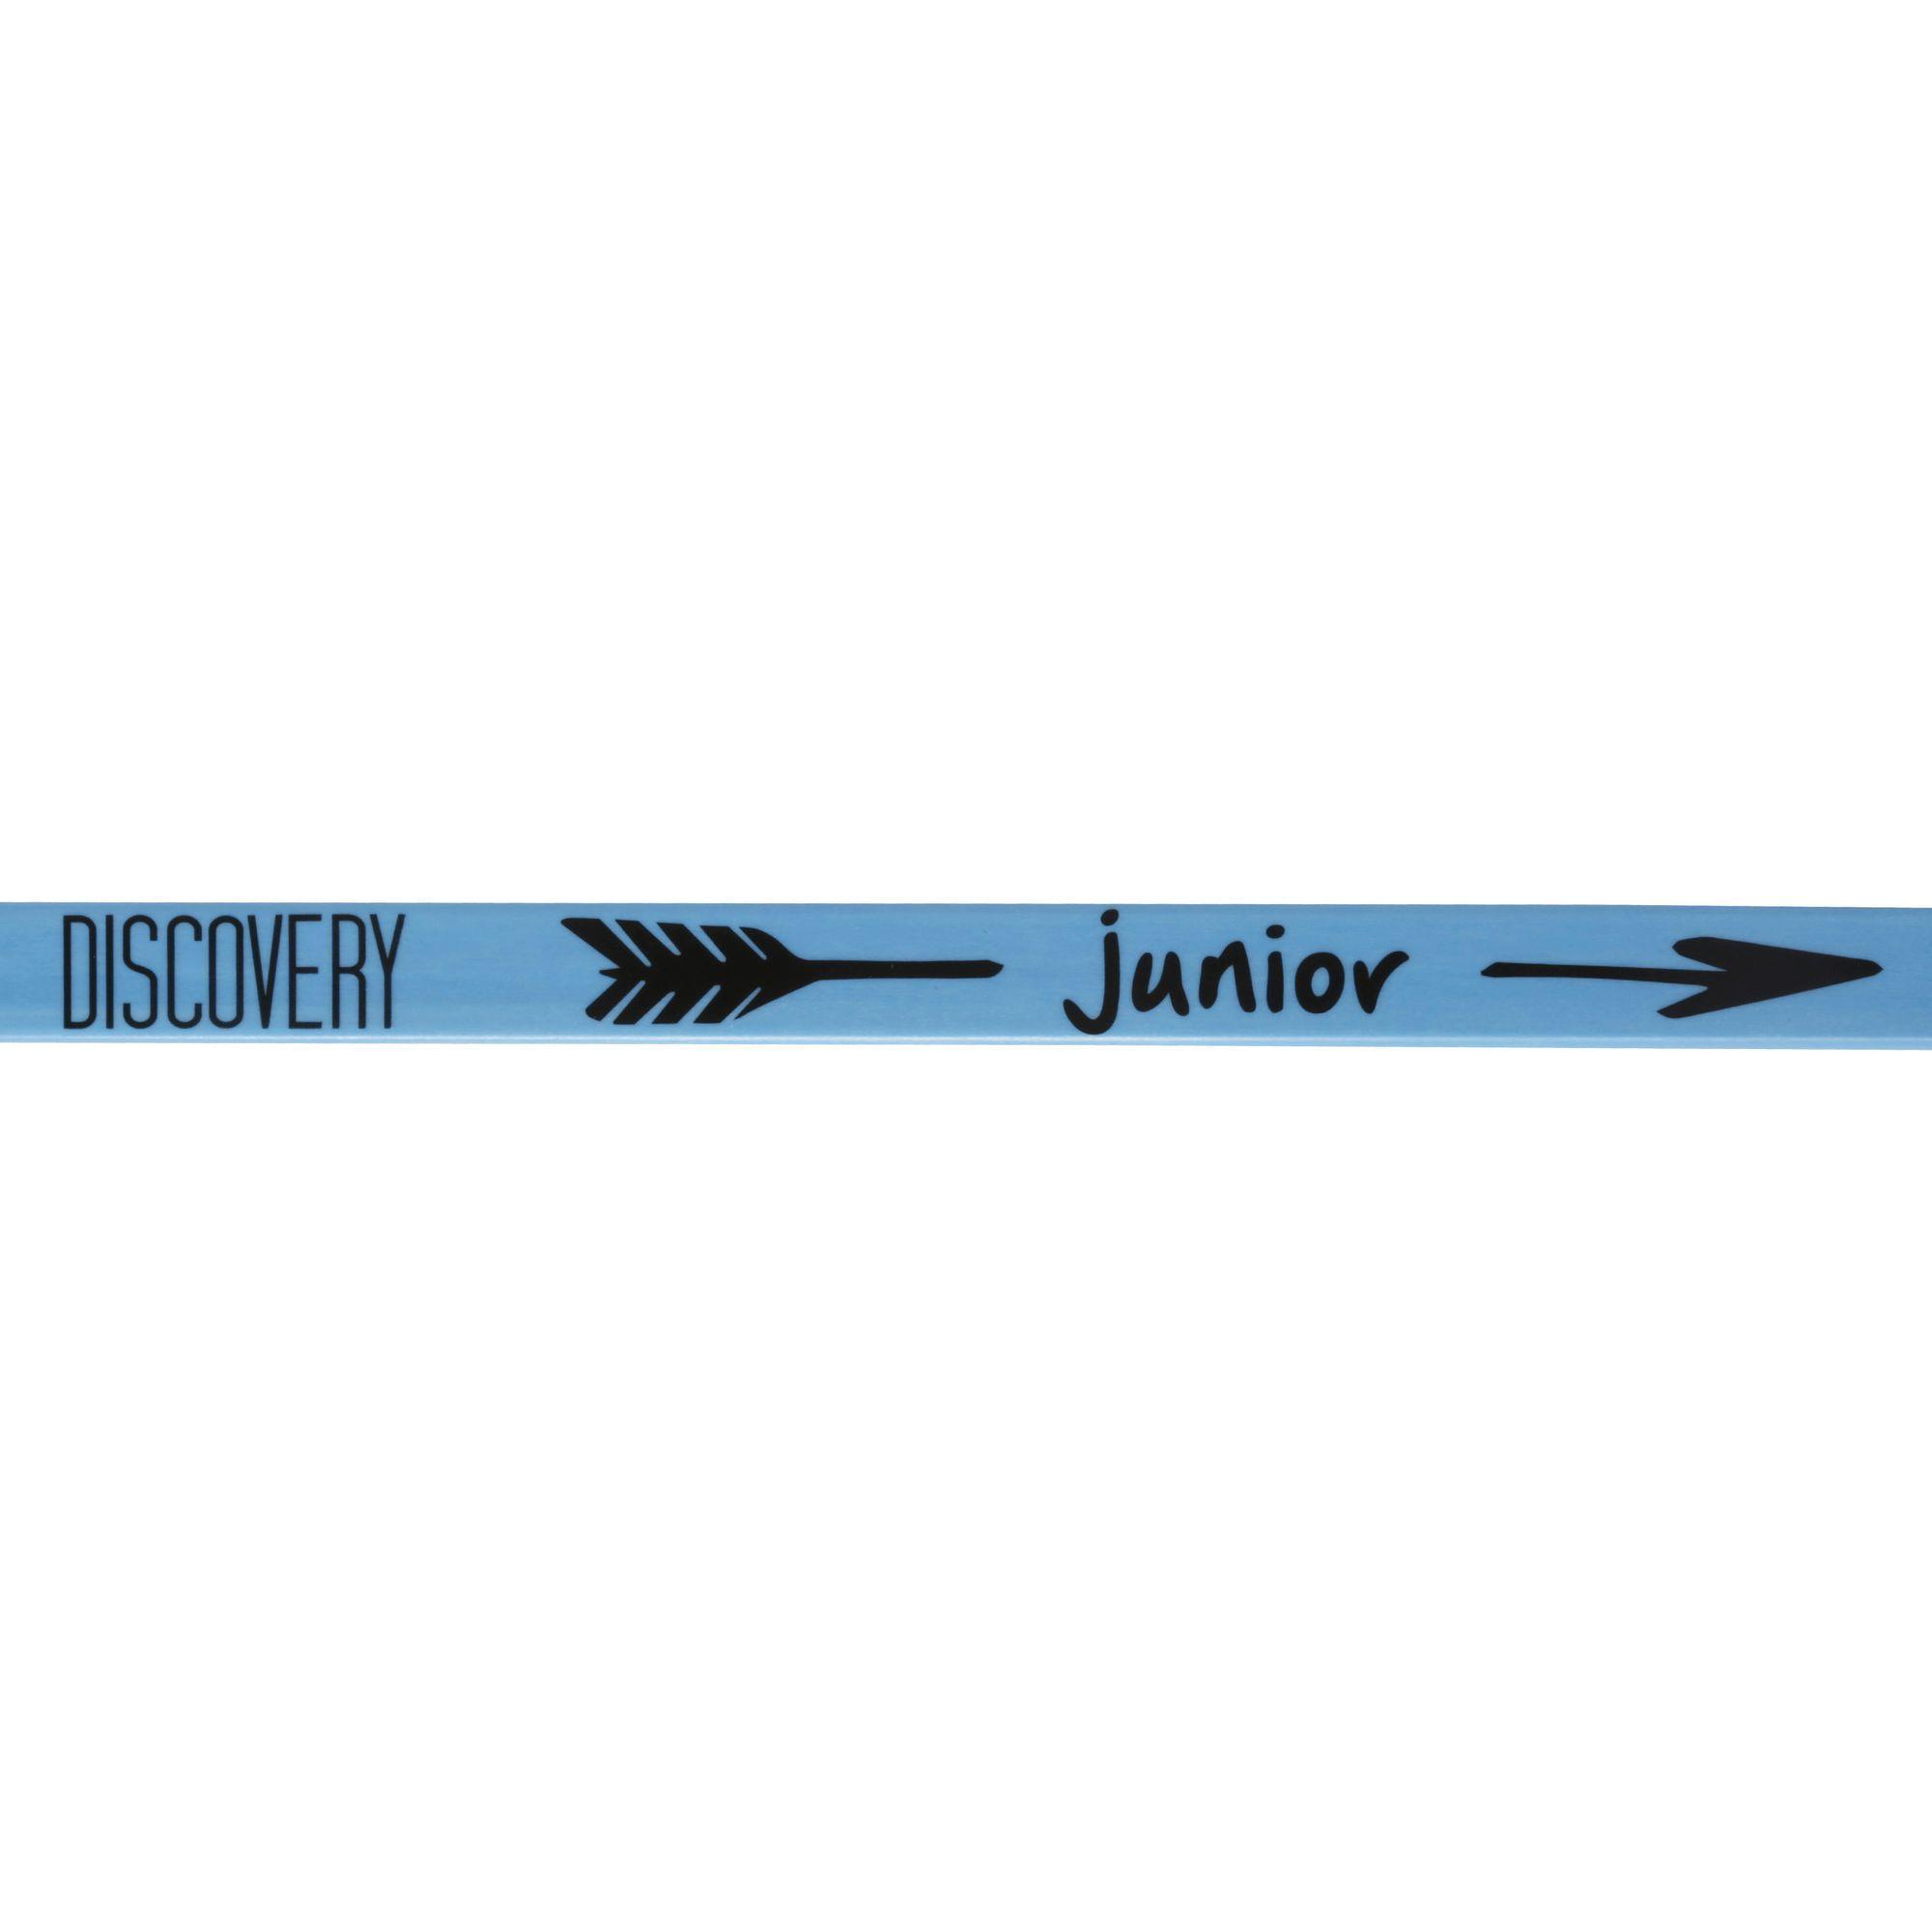 Kids' Archery Bow Discovery Junior - Blue 8/10